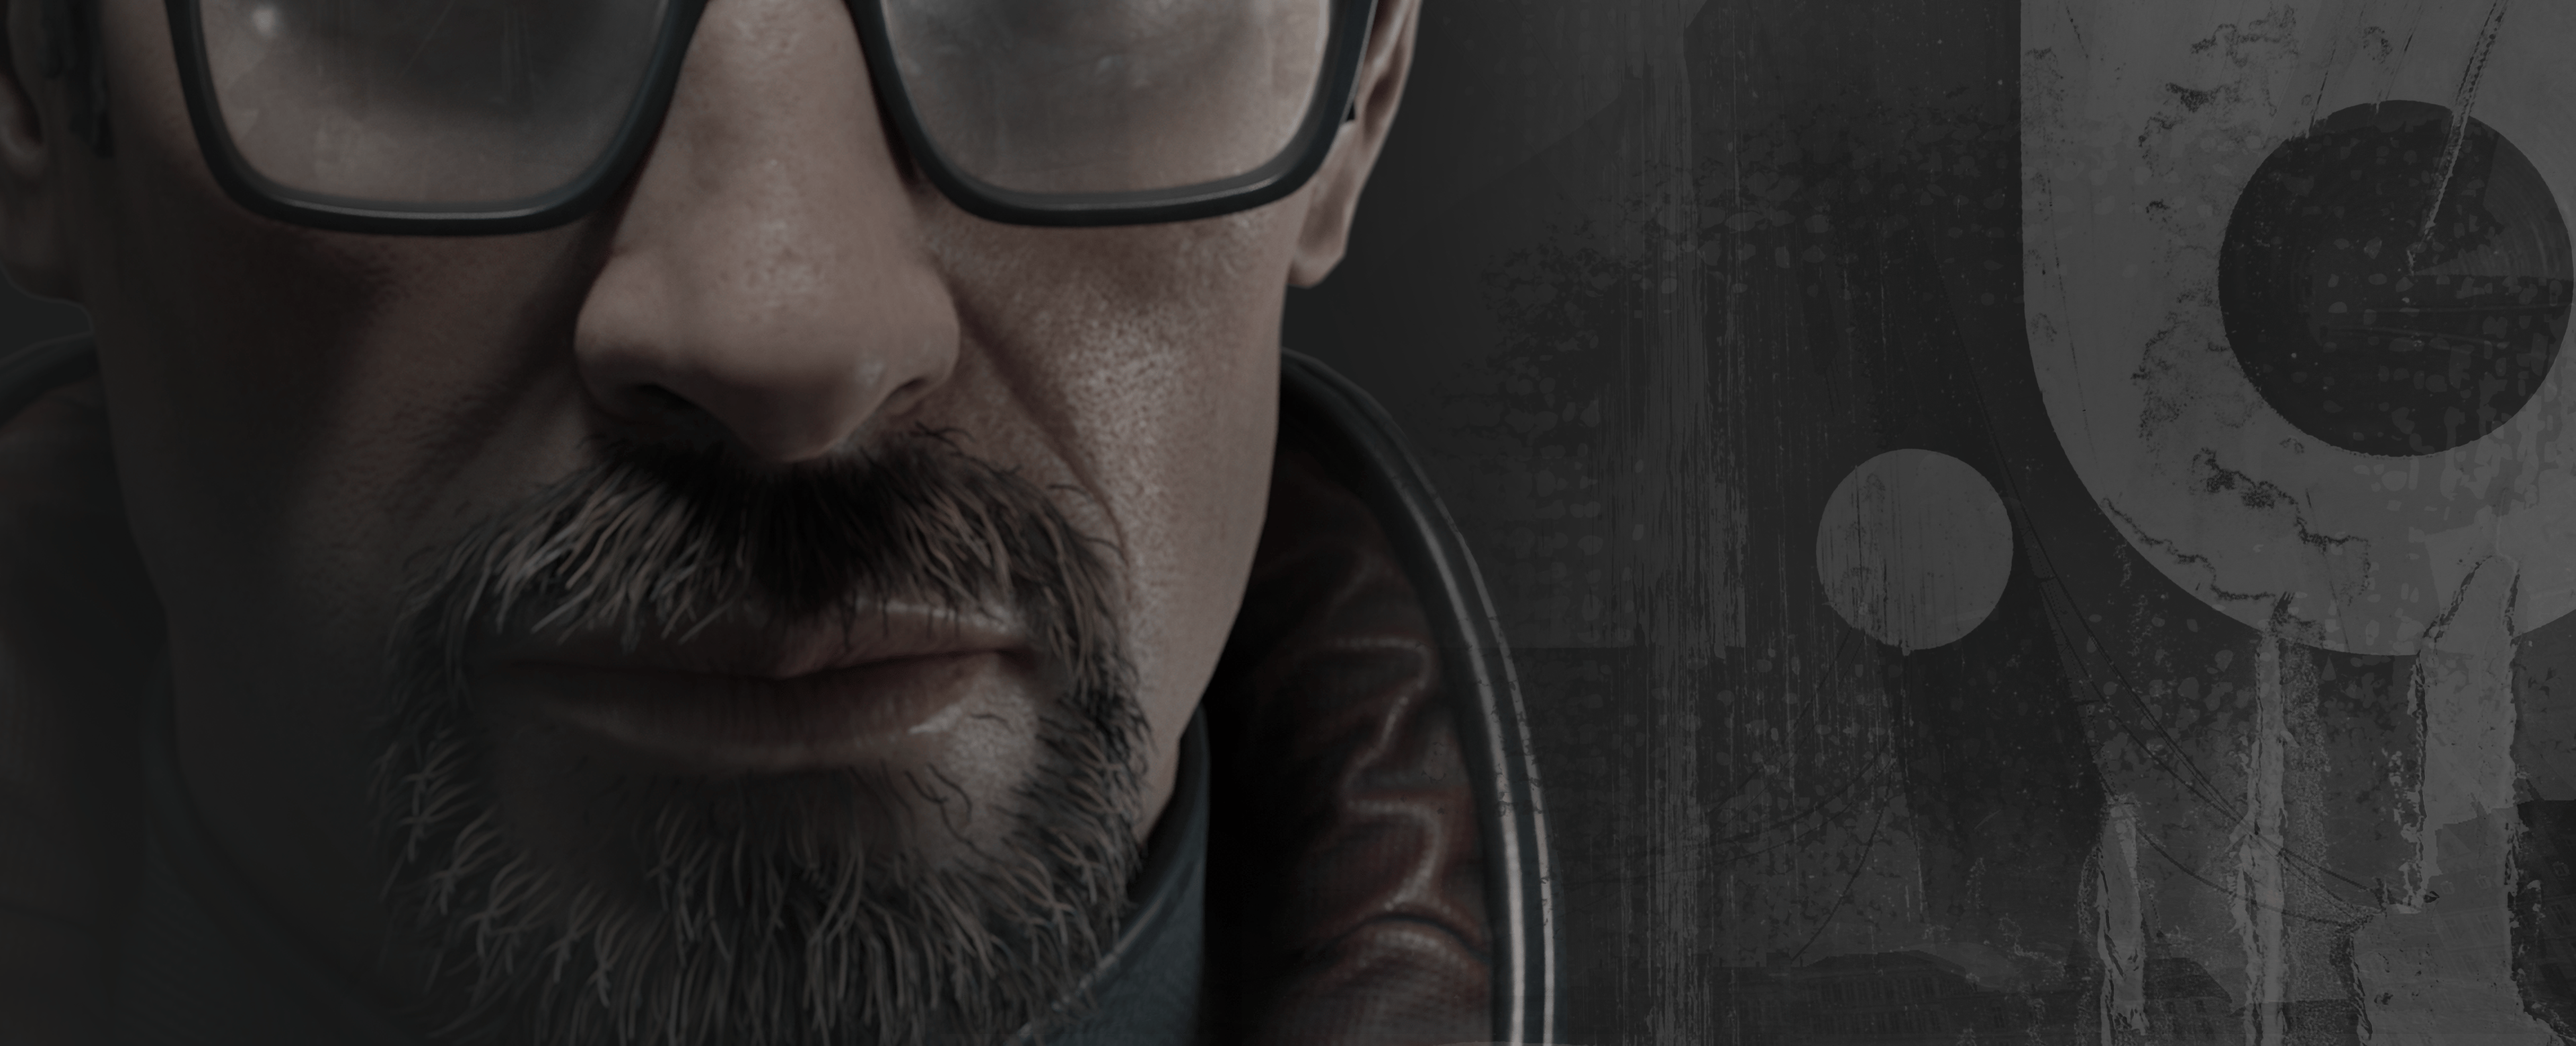 Gordon Freeman With a Firm Look Over an Abstract Industrial Background